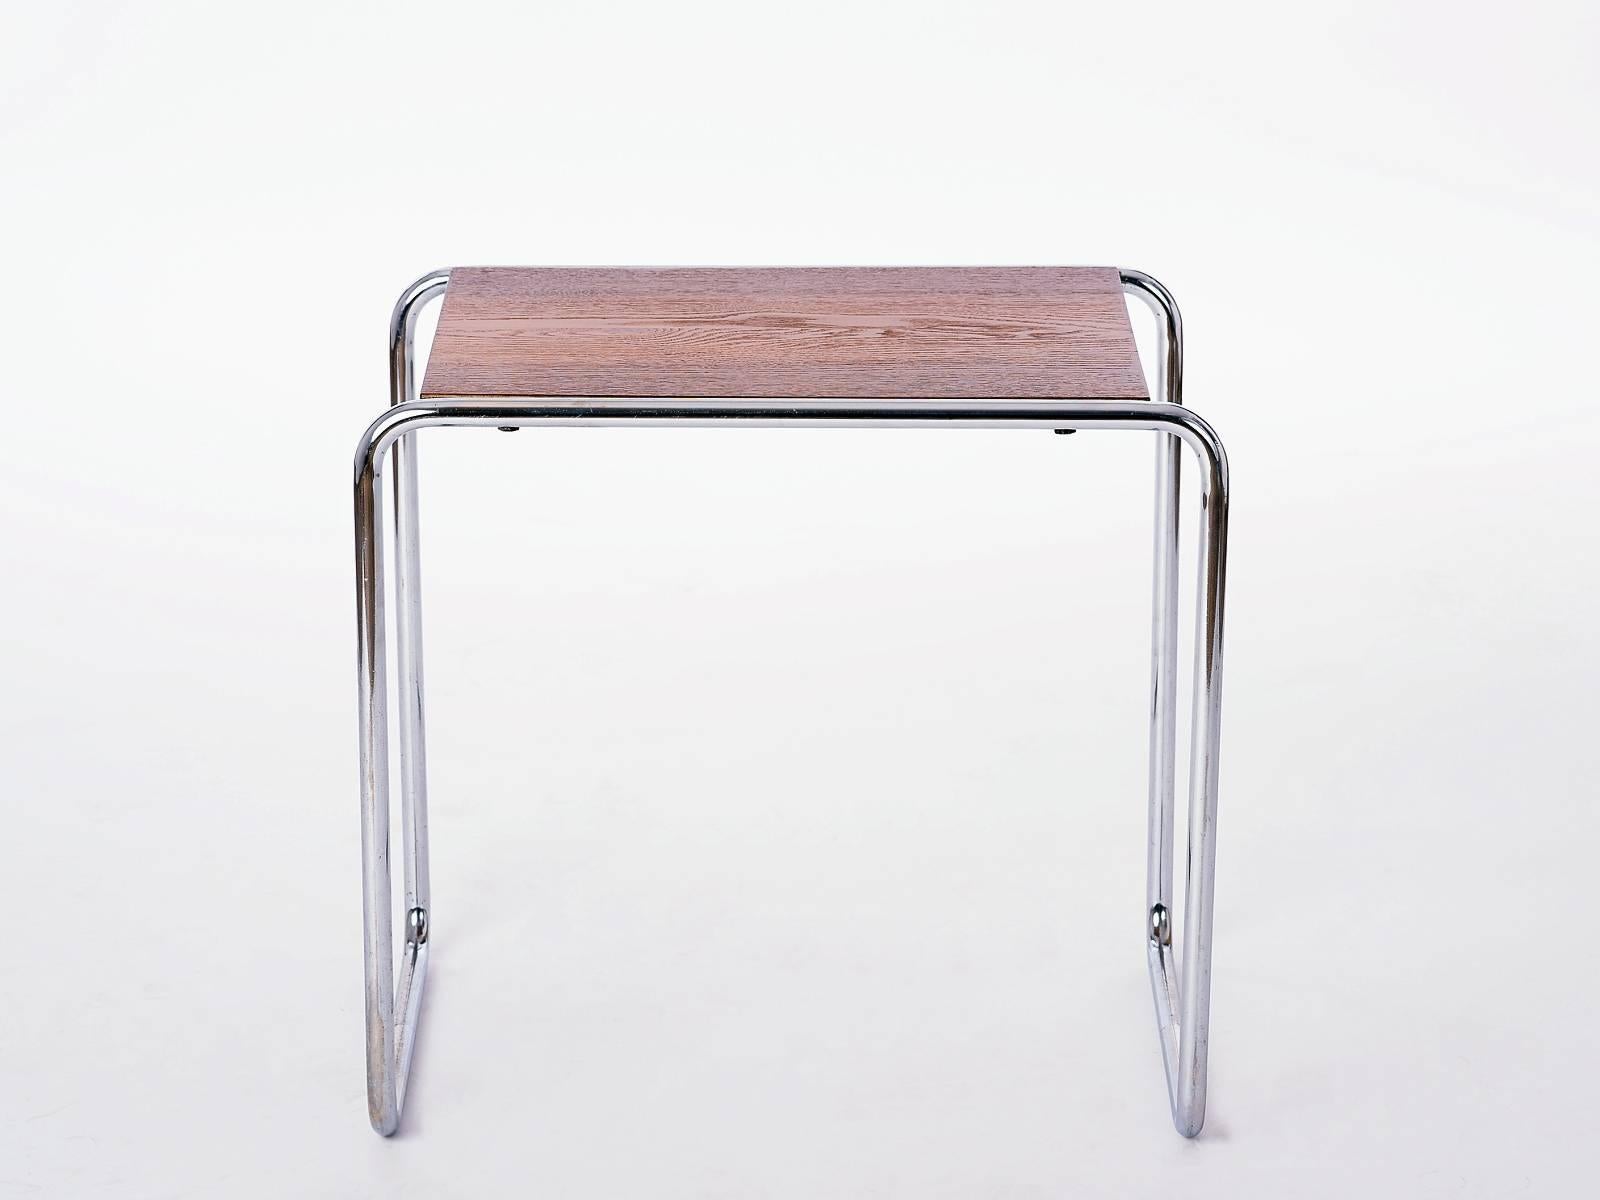 This chromed tubular steel table B9 was designed by the German Bauhaus designer Marcel Breuer for Thonet in the 1930s.
The wooden desk has been restored. The original chrome is in a very good
condition. Collector's item!